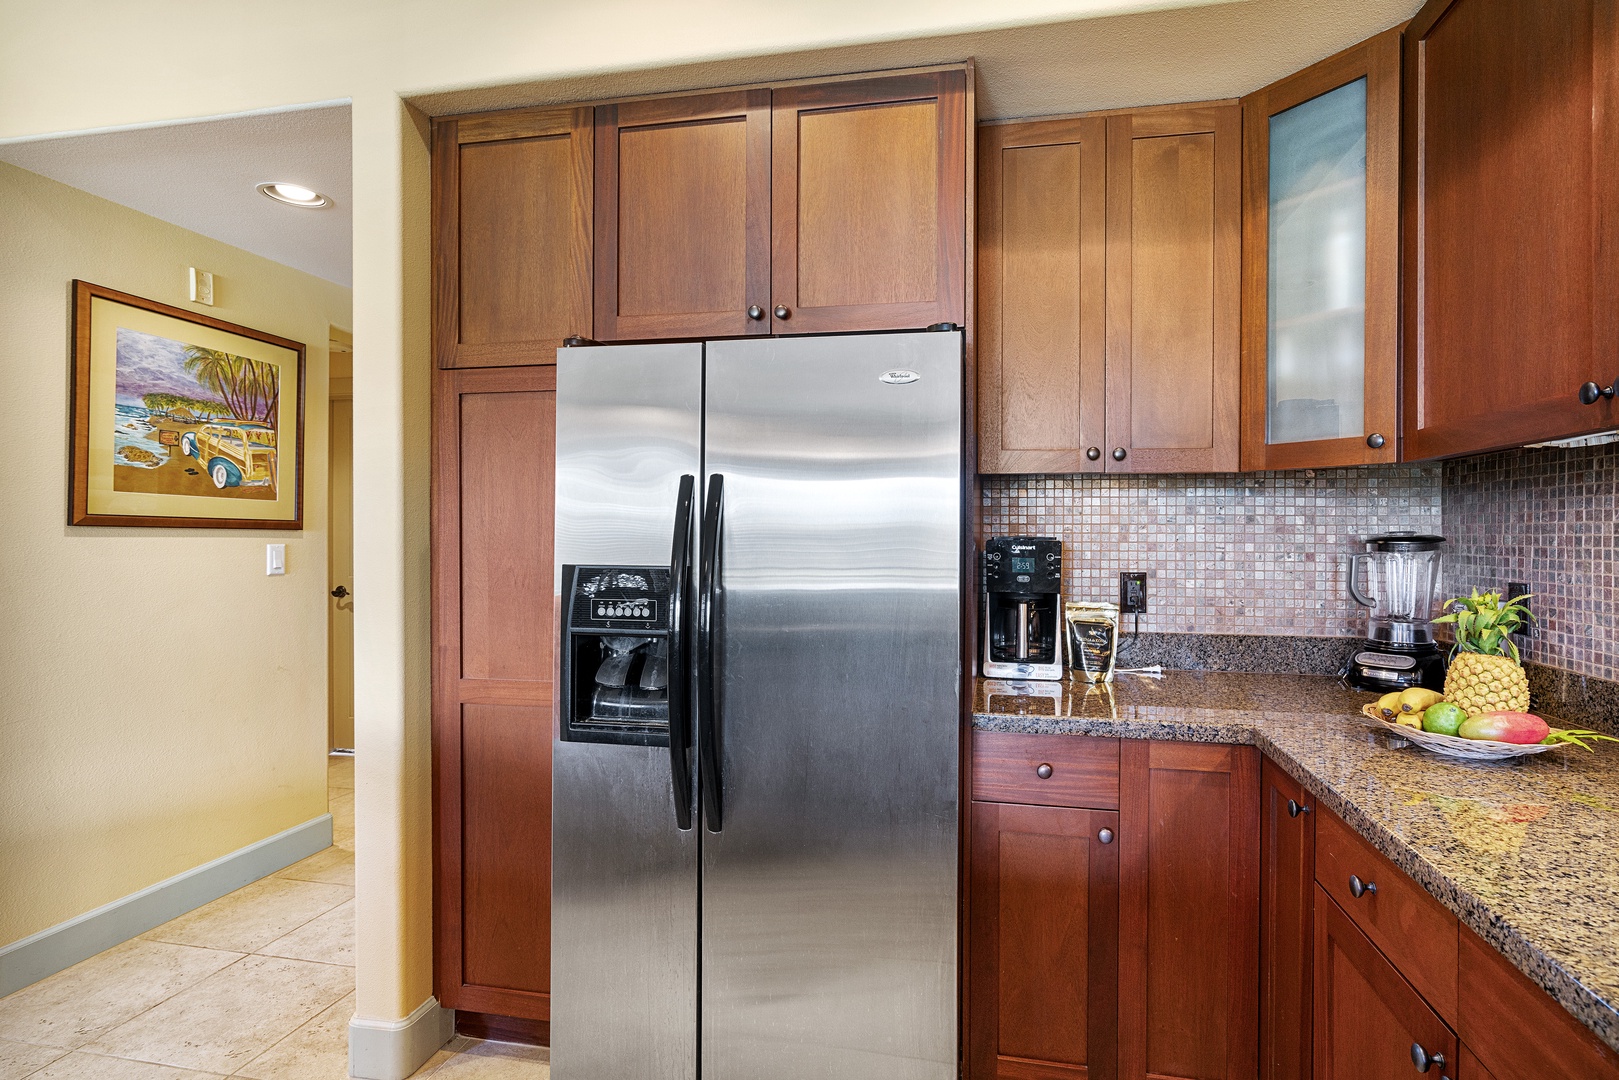 Waikoloa Vacation Rentals, Hali'i Kai at Waikoloa Beach Resort 9F - The fully equipped gourmet kitchen with stainless steel appliances, granite countertops, and bar seating flows seamlessly into a dining area for six and a welcoming living space with ample comfortable seating.